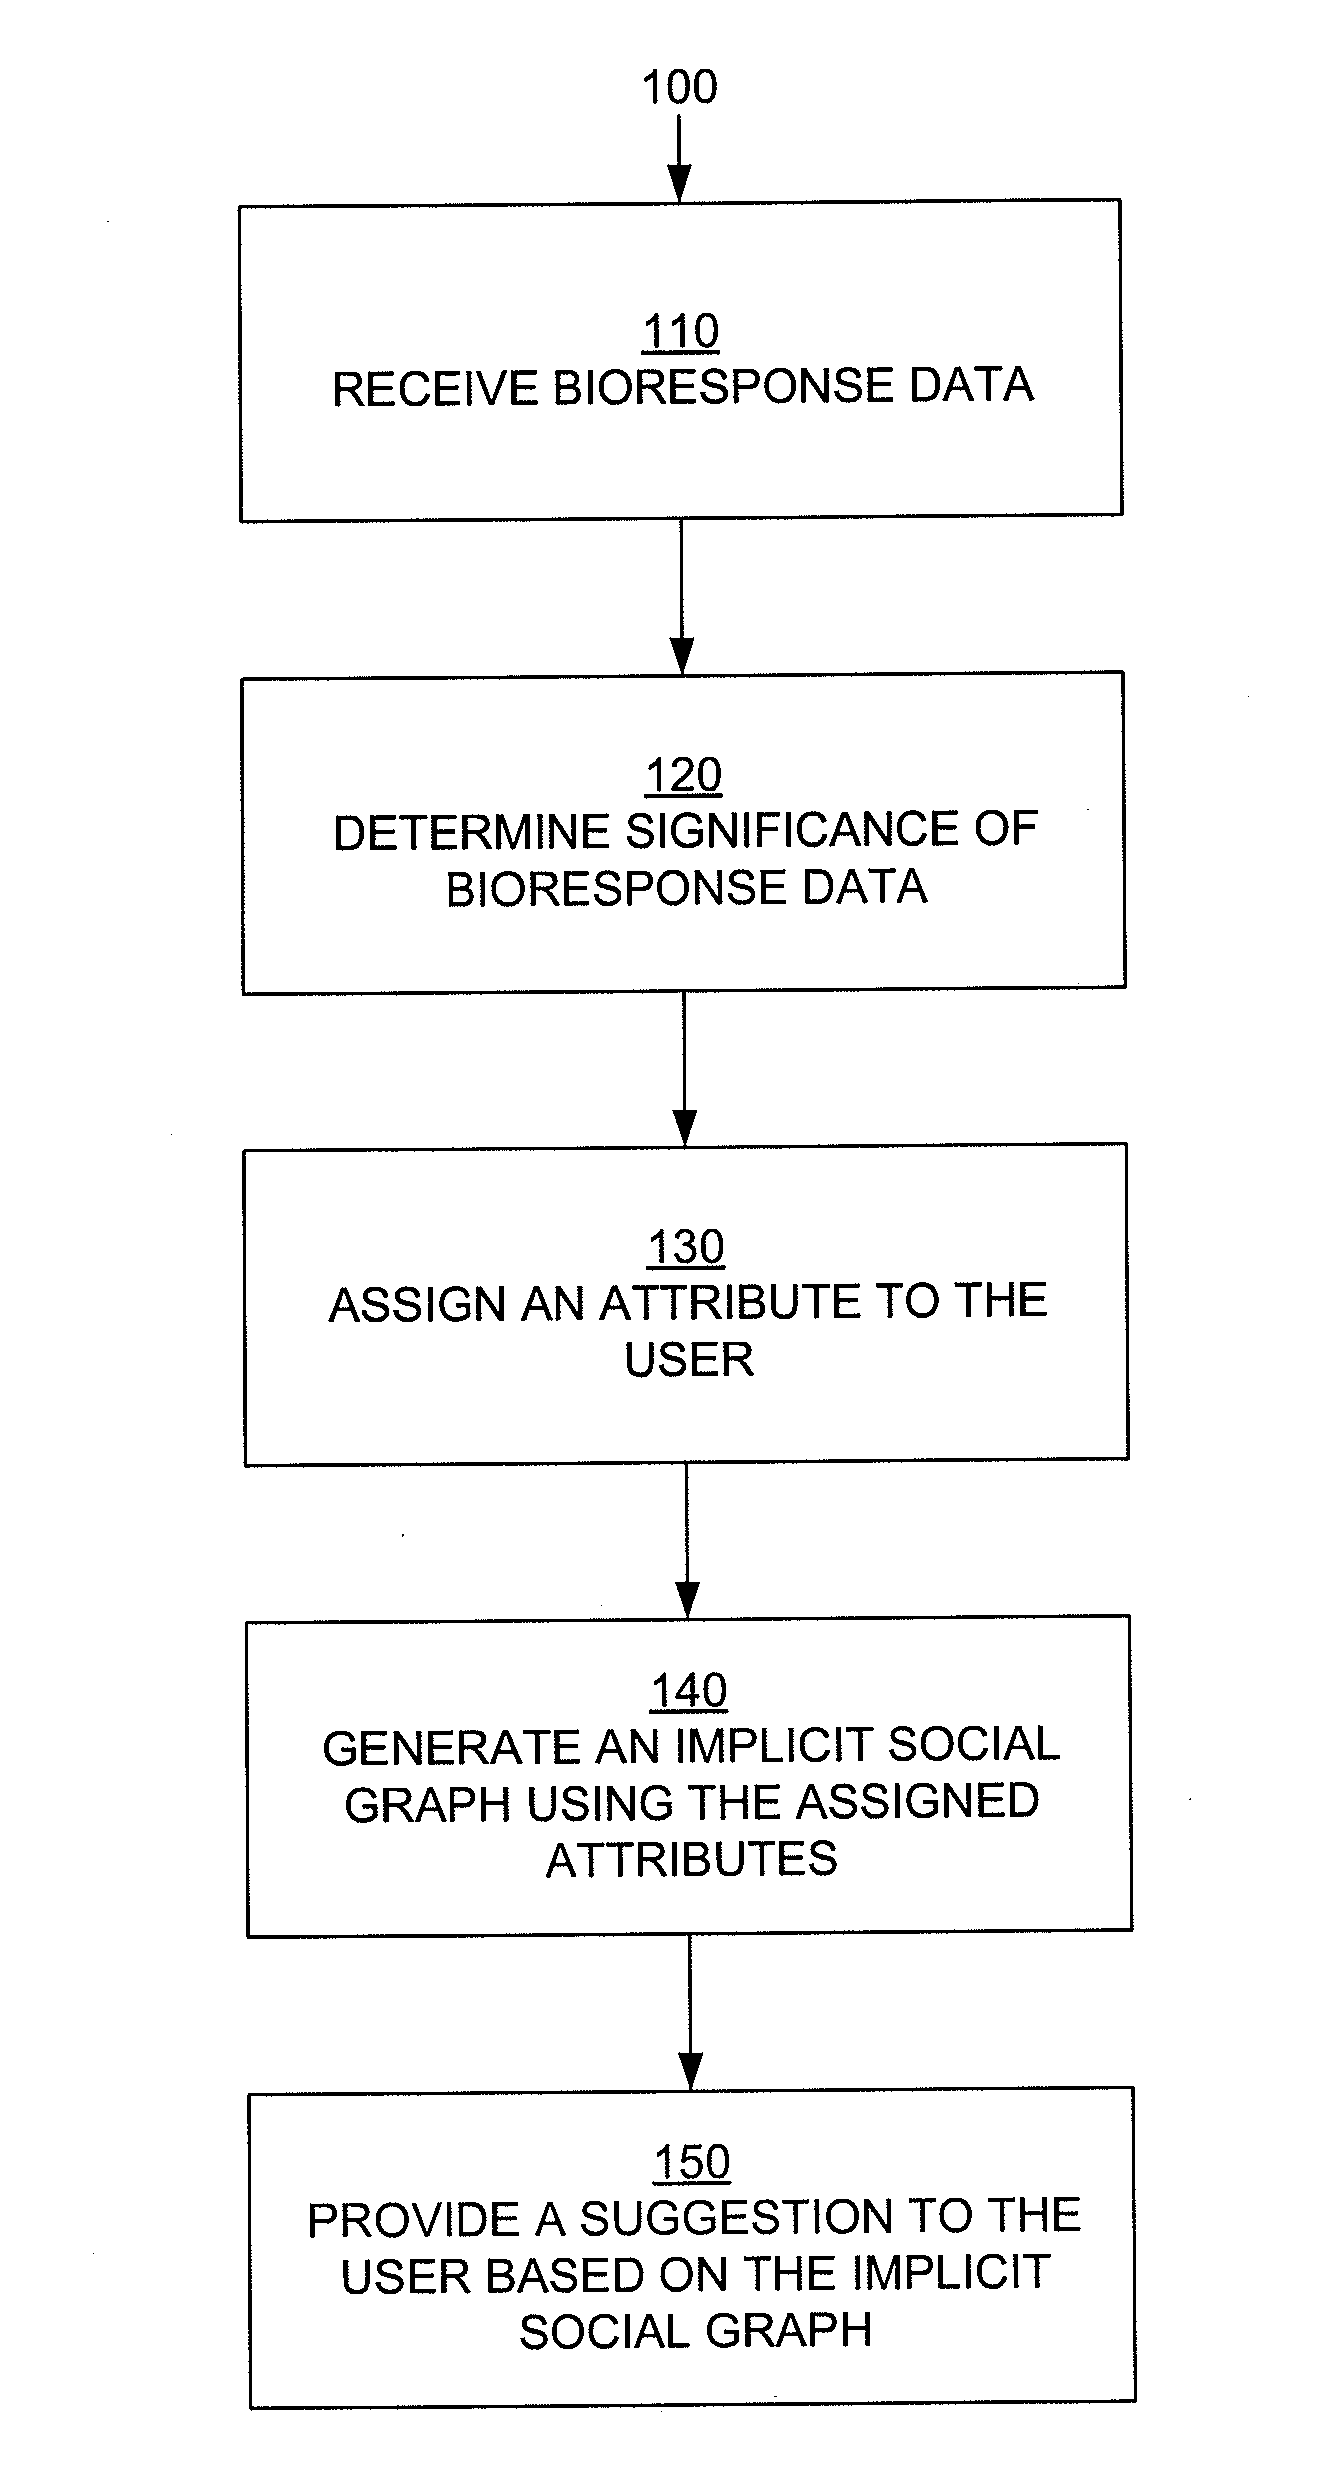 Method and system of generating an implicit social graph from bioresponse data